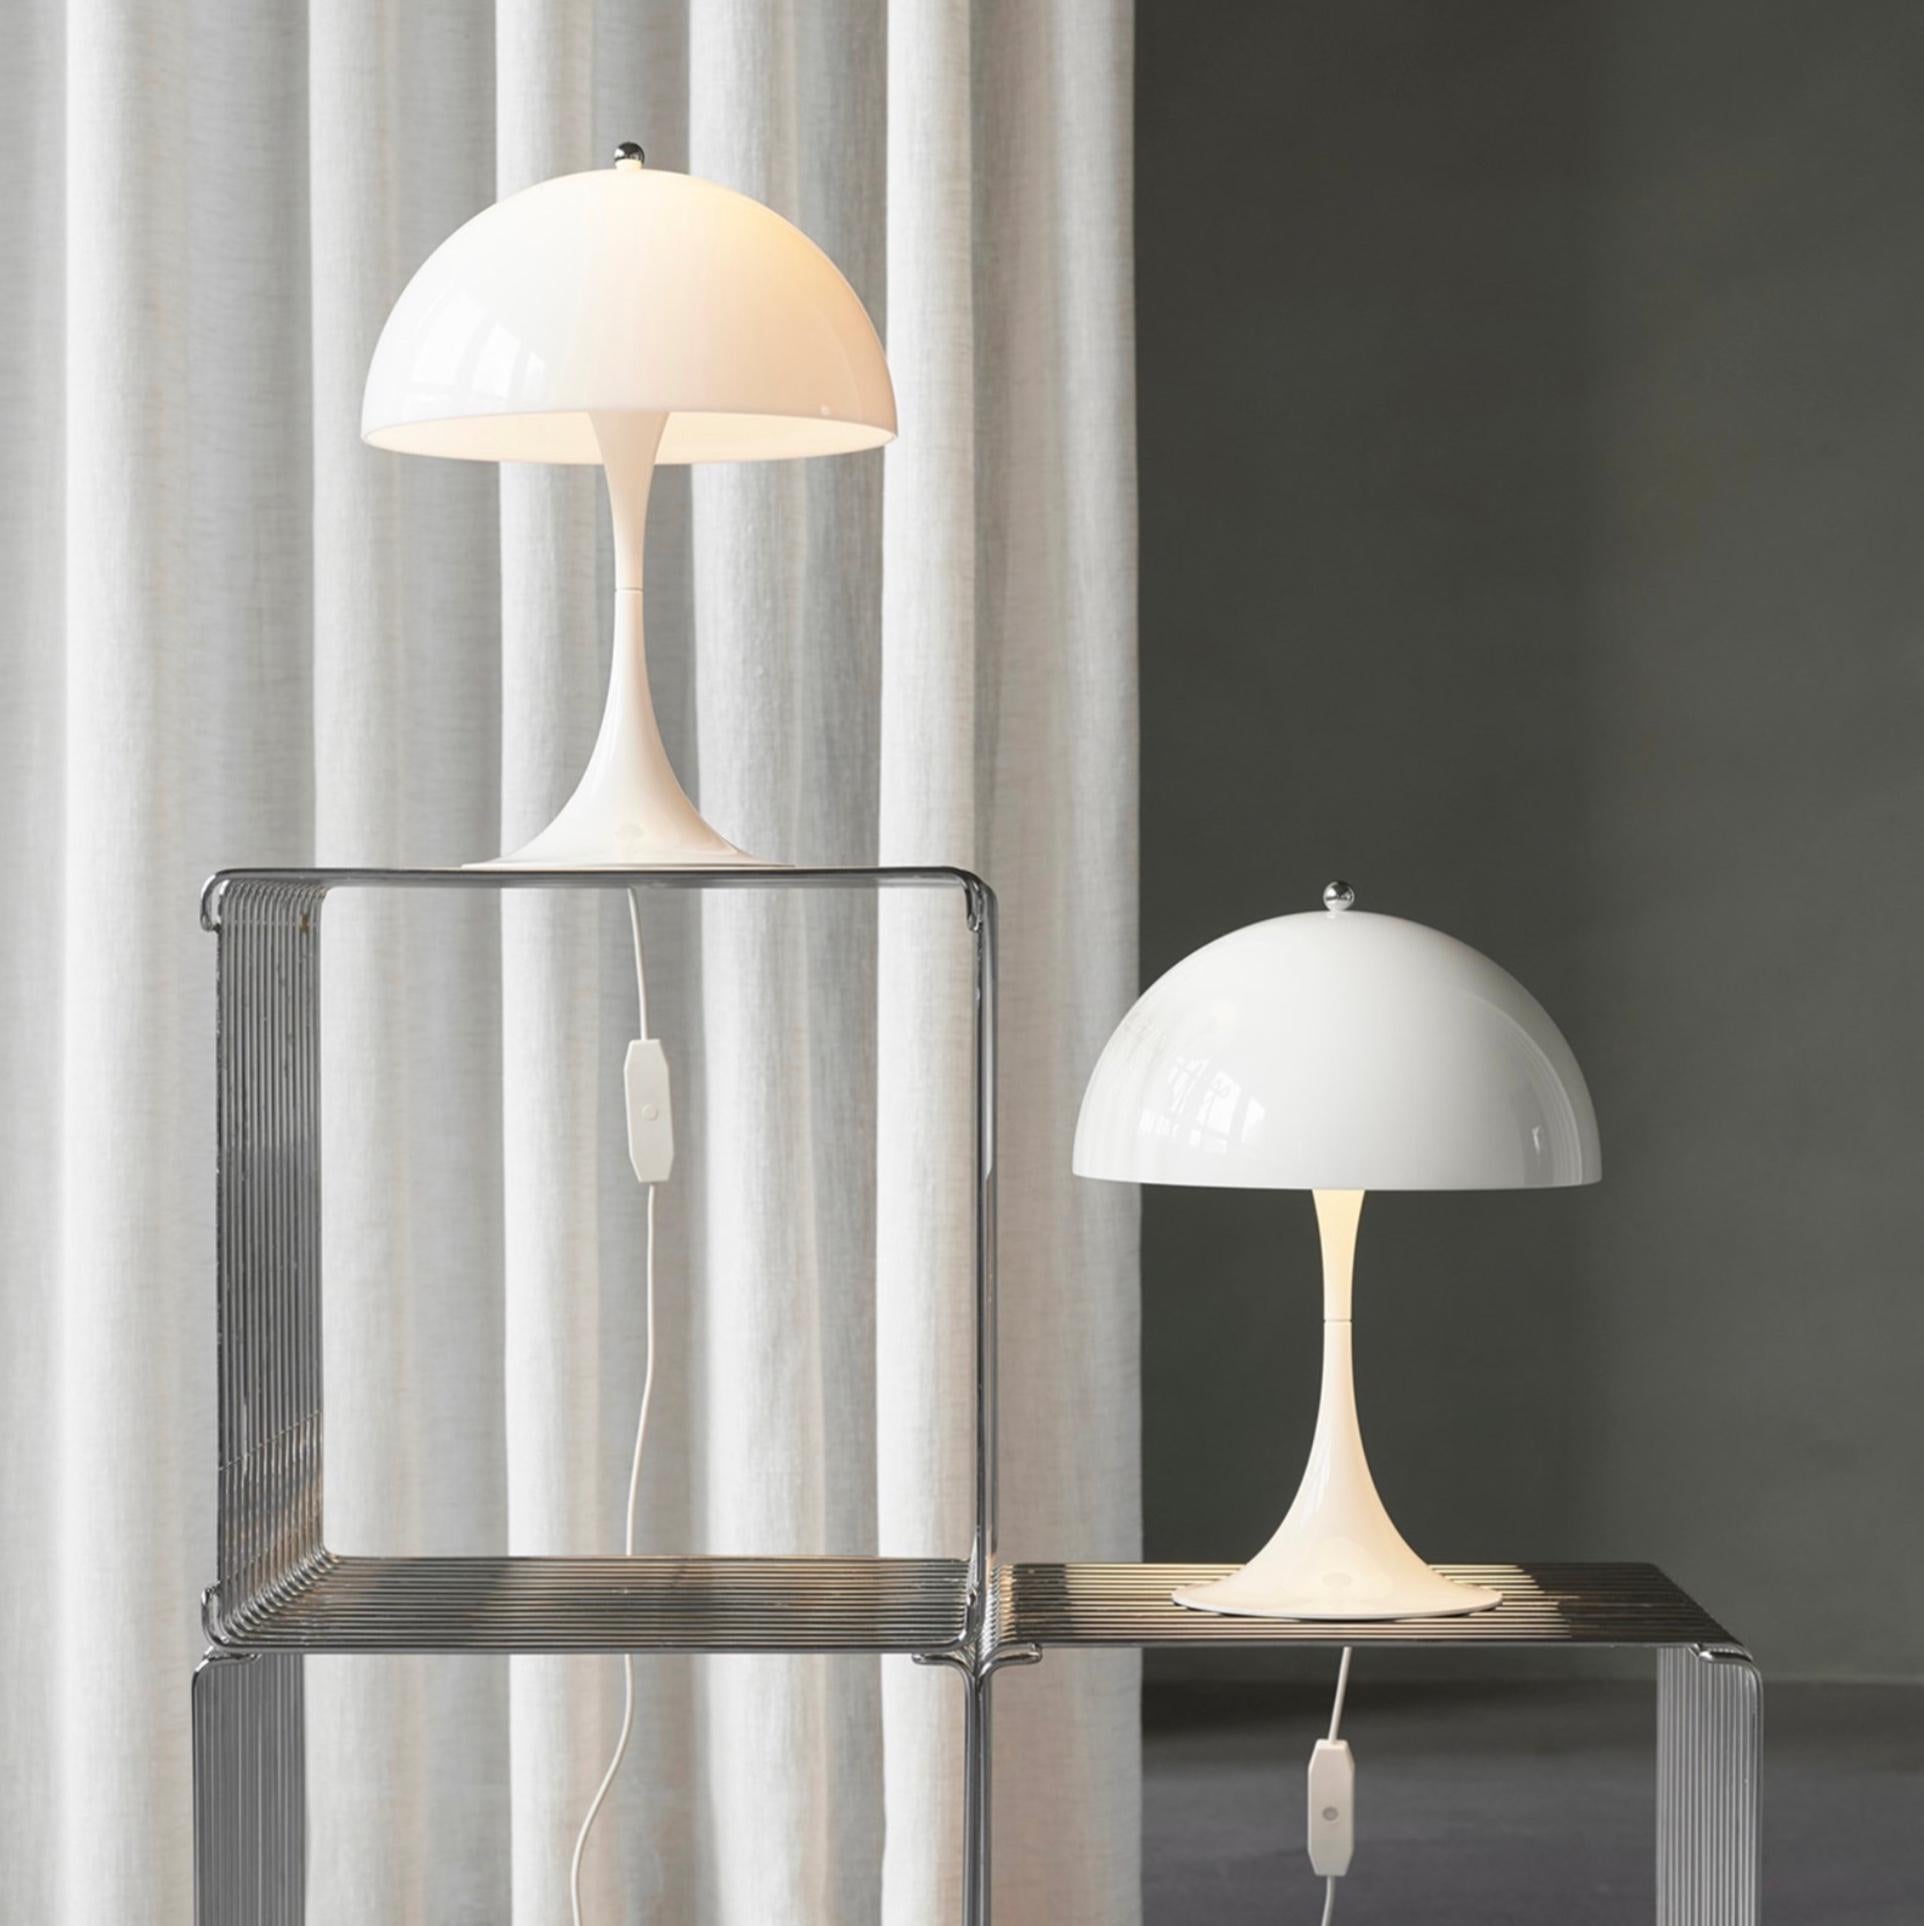 Mid-Century Modern Verner Panton 'Panthella 250' Table Lamp in 'White' Acrylic for Louis Poulsen For Sale